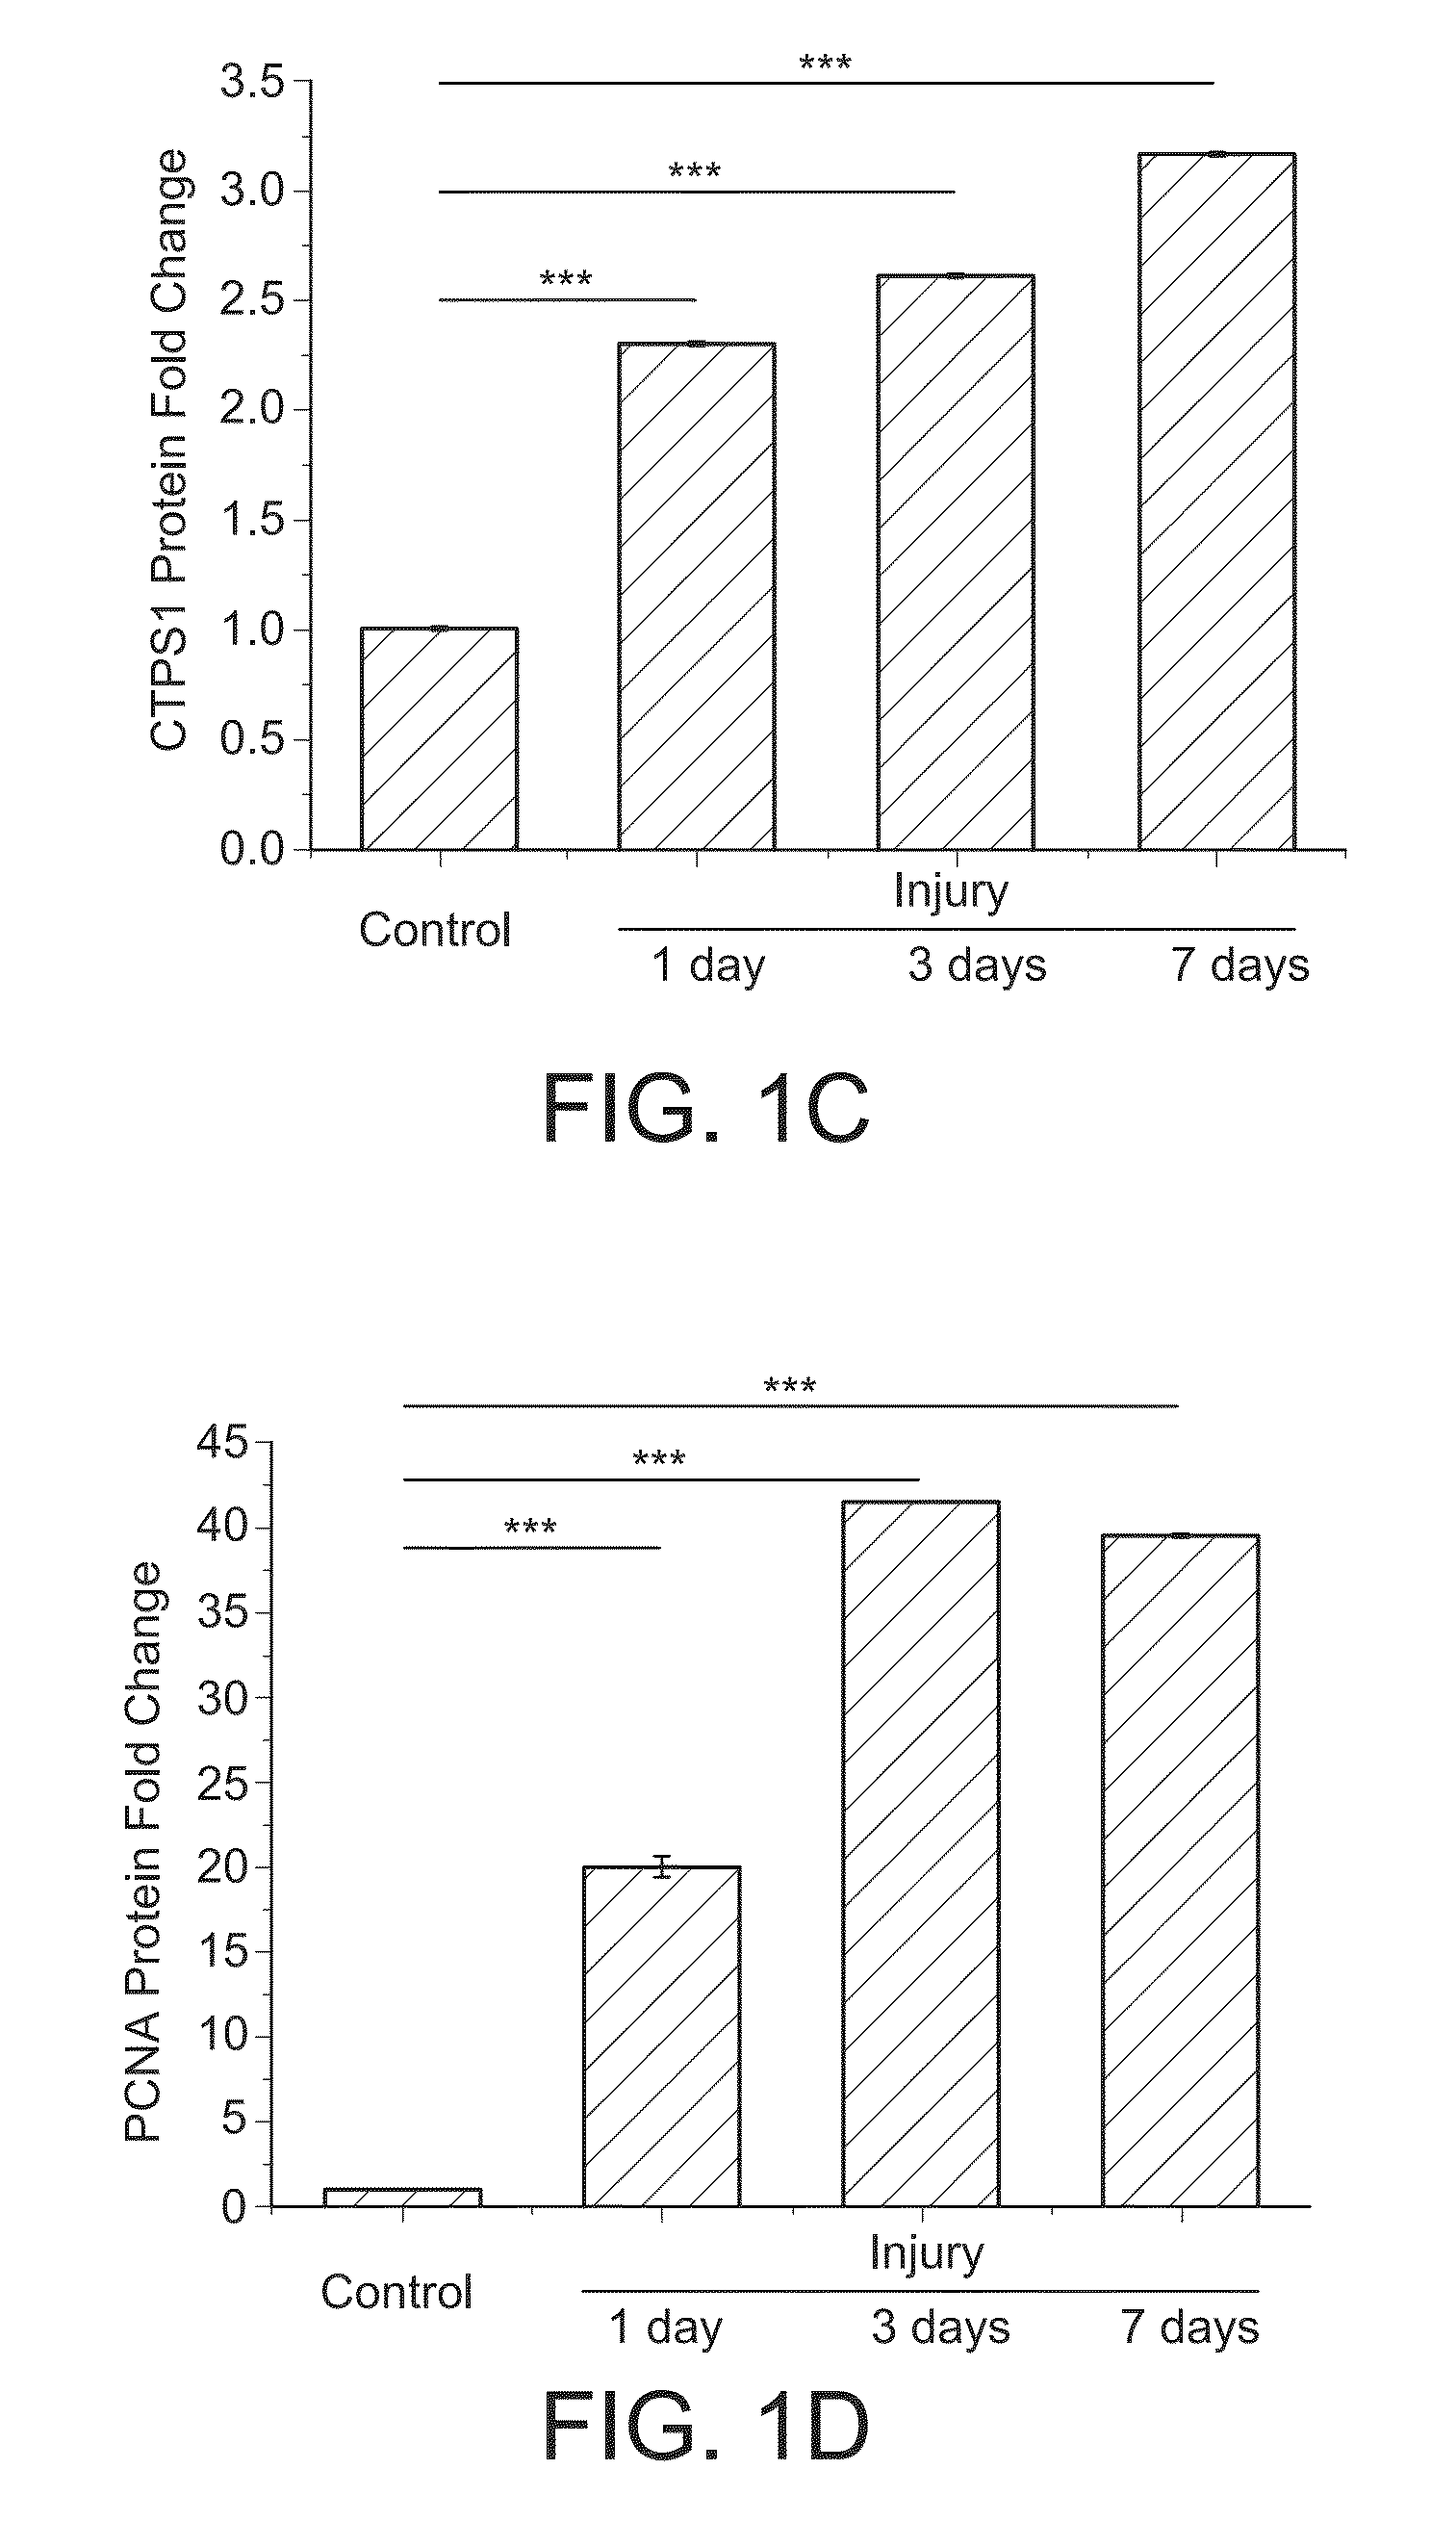 Compositions and Methods for Reducing Neointima Formation